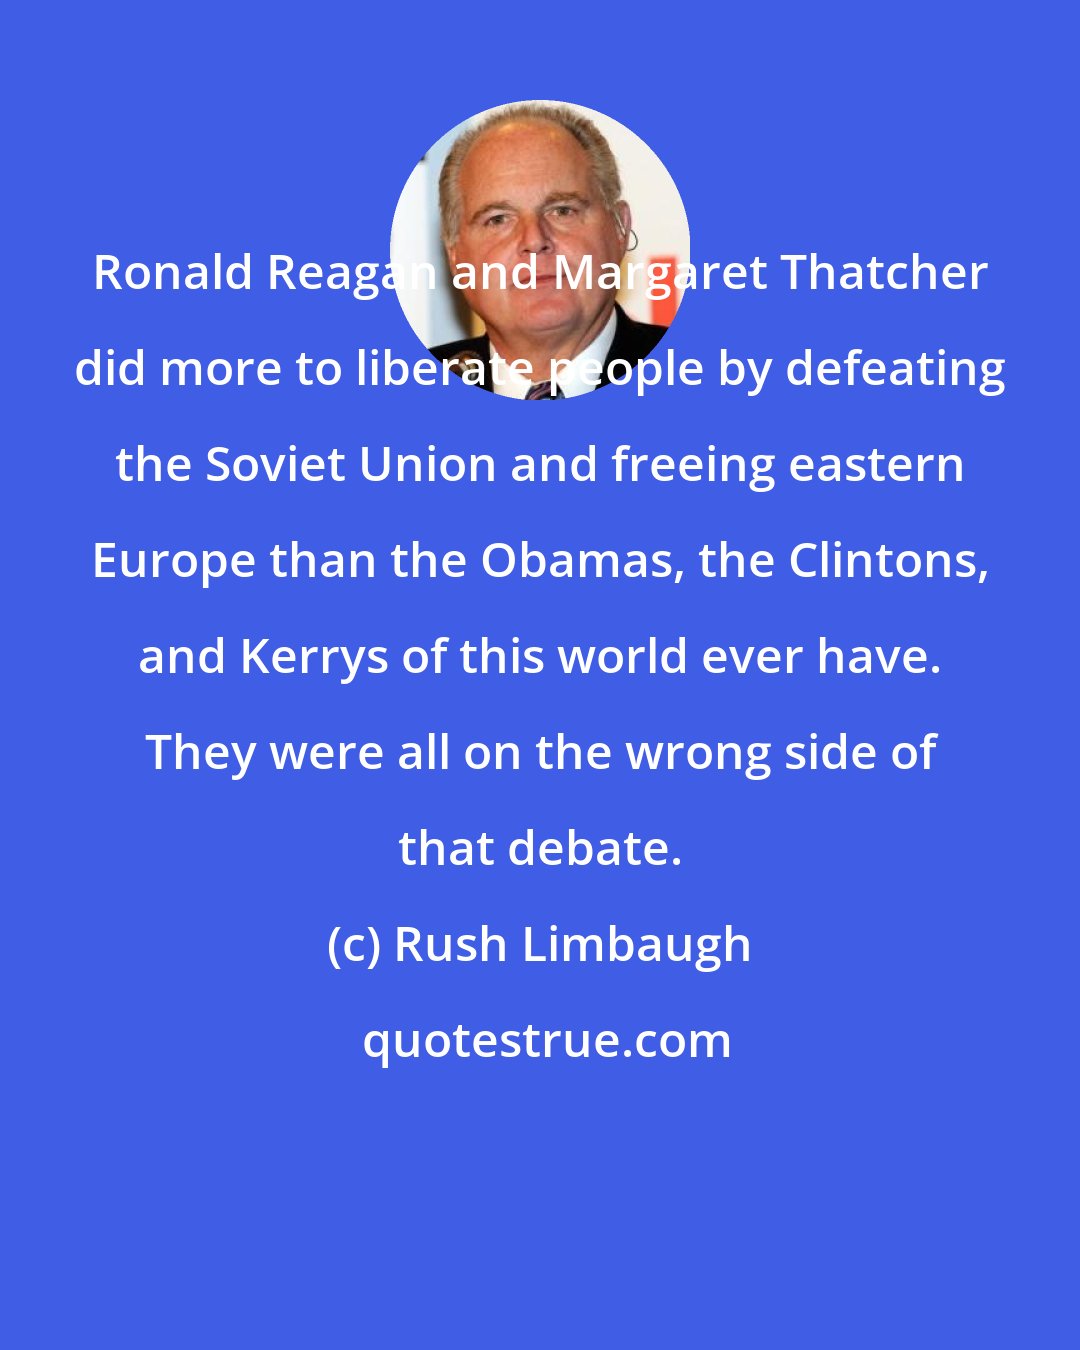 Rush Limbaugh: Ronald Reagan and Margaret Thatcher did more to liberate people by defeating the Soviet Union and freeing eastern Europe than the Obamas, the Clintons, and Kerrys of this world ever have. They were all on the wrong side of that debate.